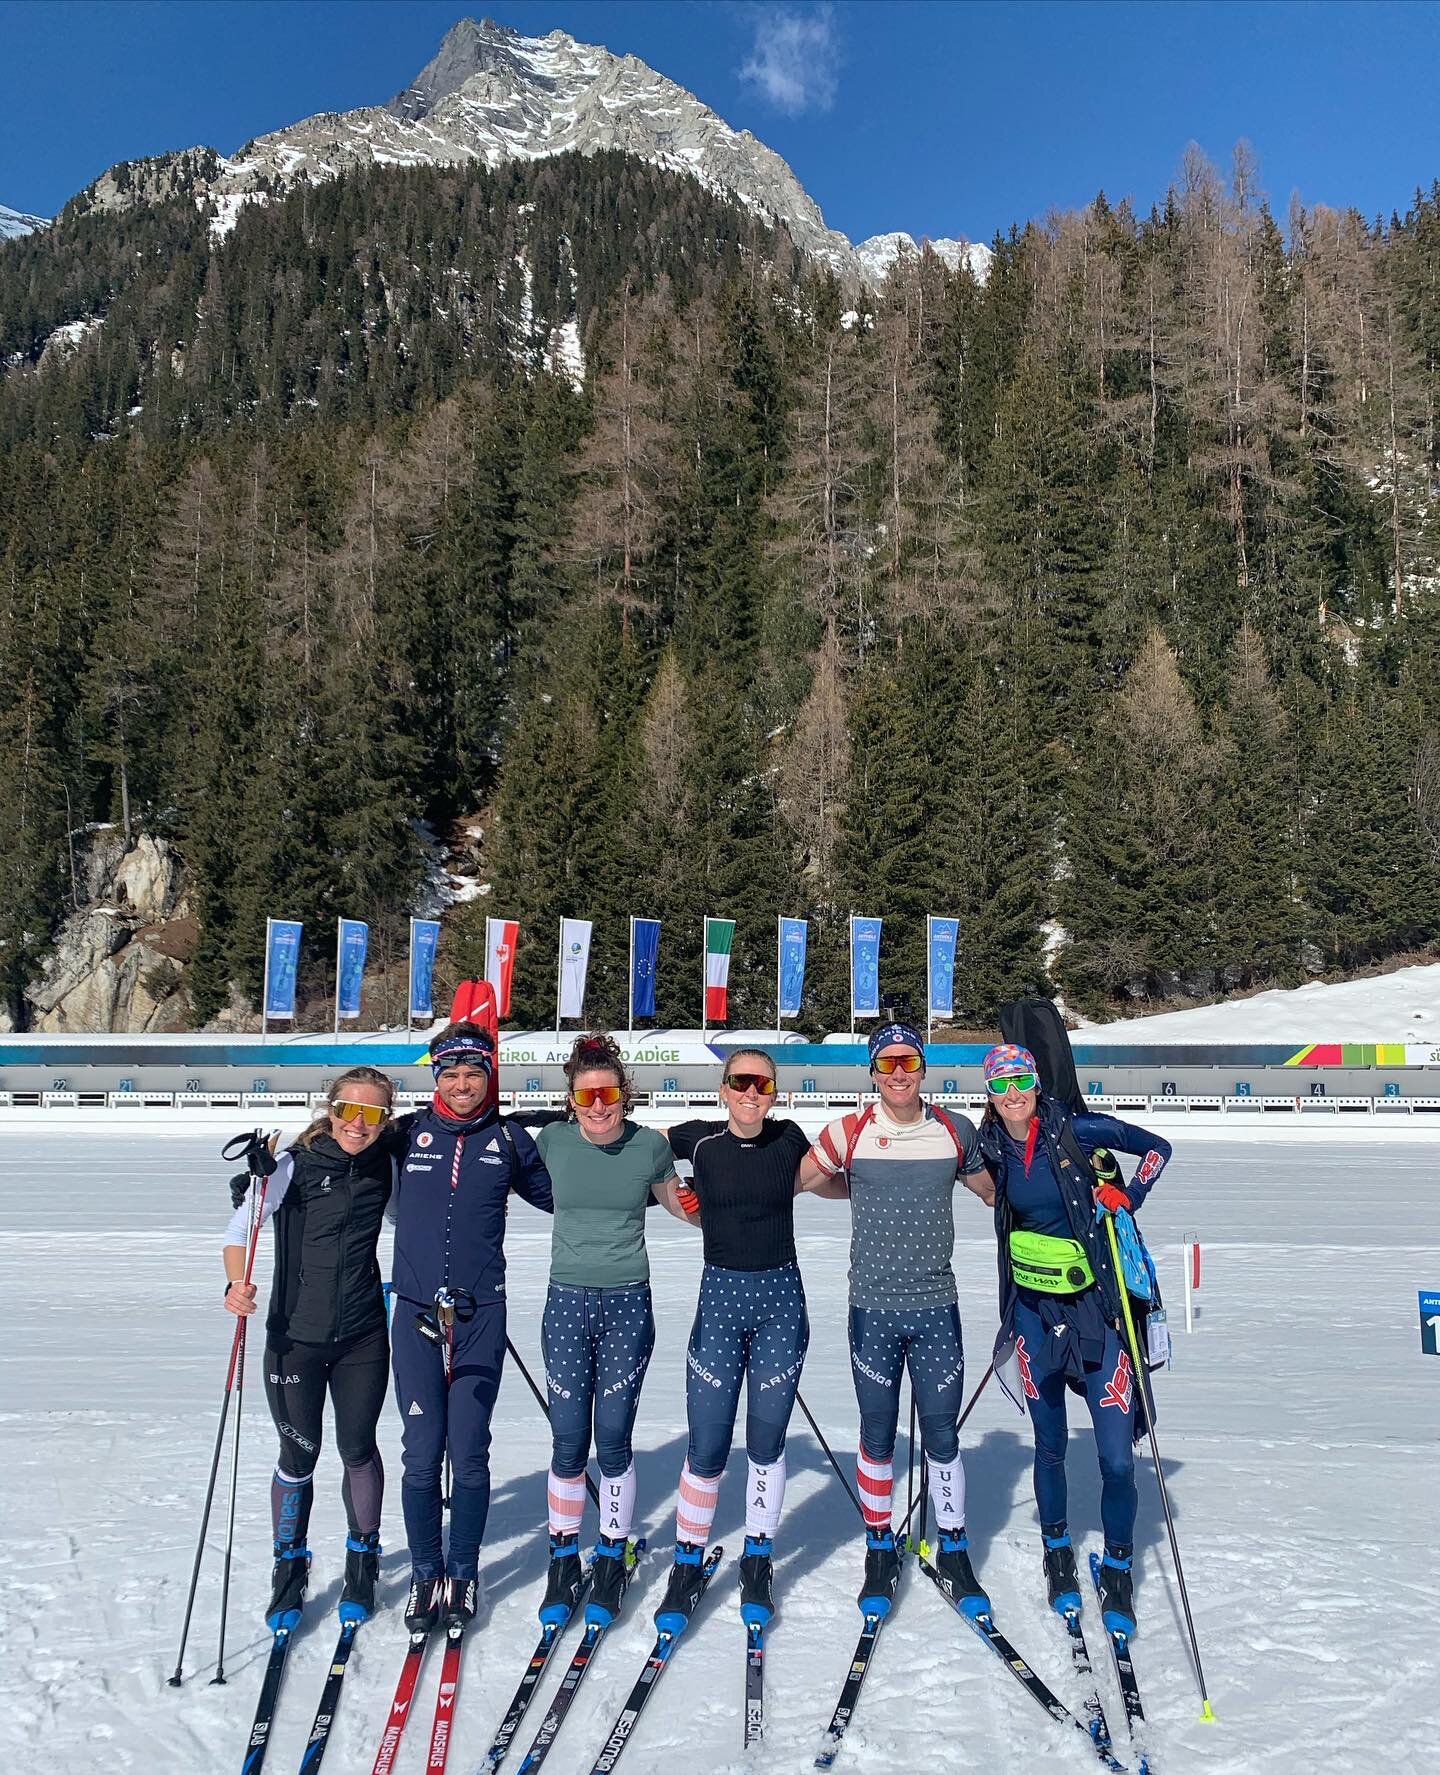 A partial GRP biathlon reunion in Antholz, including toasty intervals and possible sunburns. We miss you @susan.dunklee